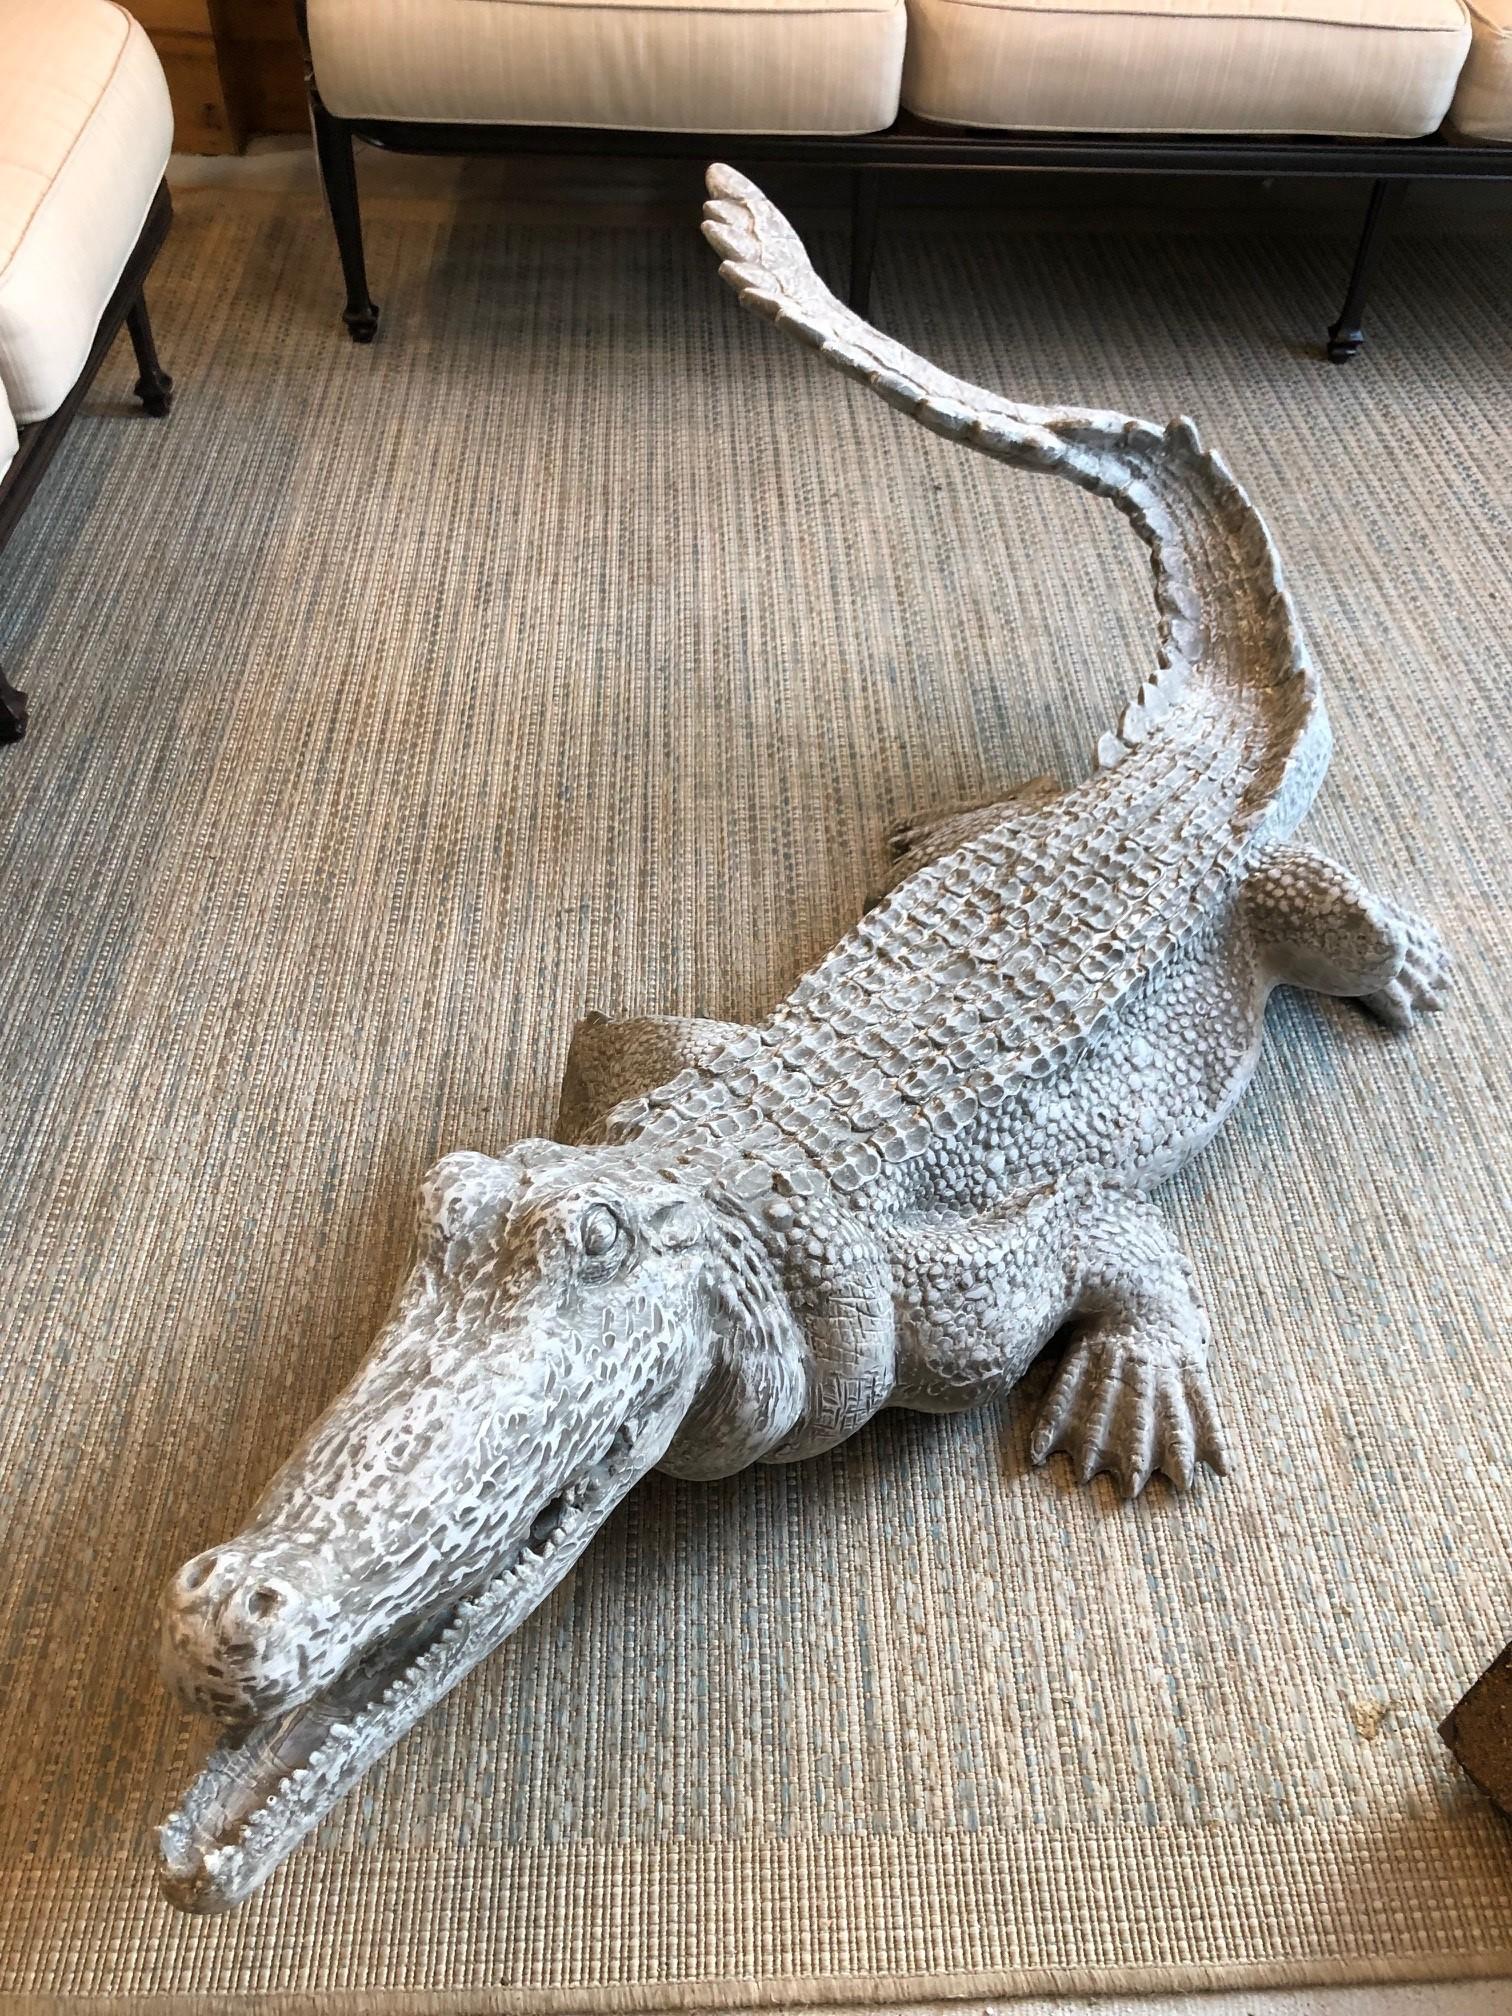 Fiberglass American Alligator made of a very durable fiberglass which would look great in any backyard or patio. You can also paint it to look more like a real crocodile or leave it a natural gray. I have many customers who place them by a pool and